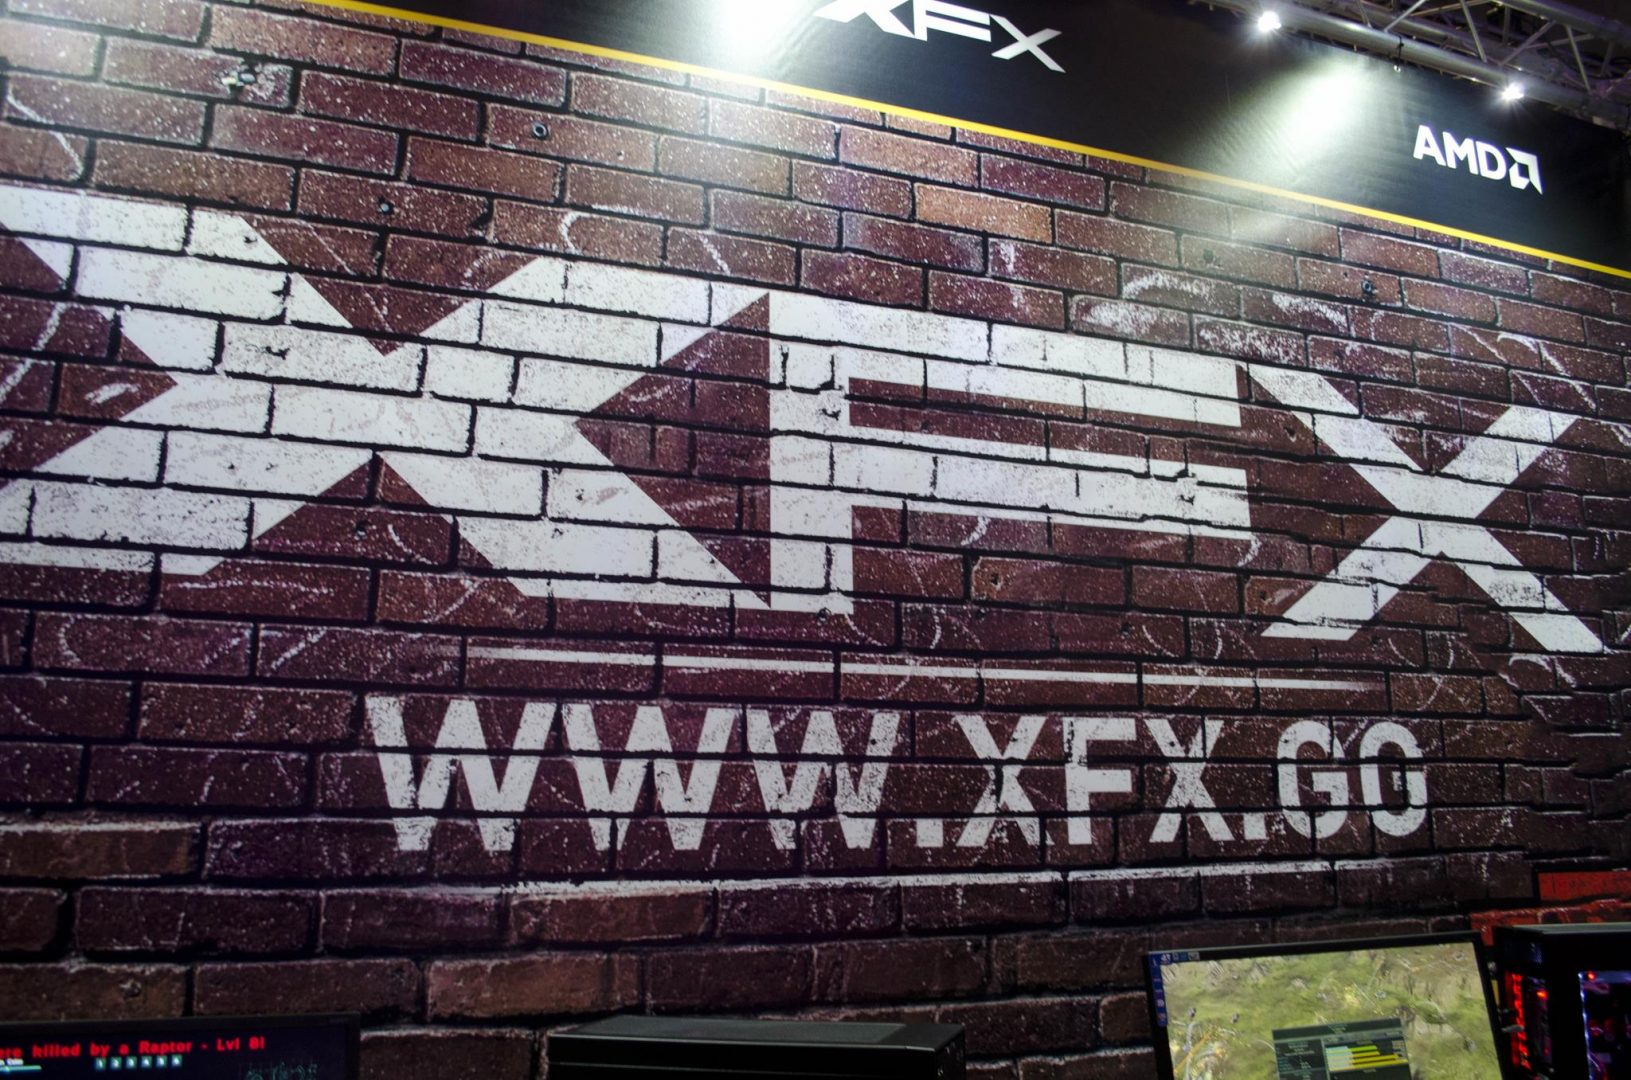 The XFX Booth at Multiplay Insomnia I55